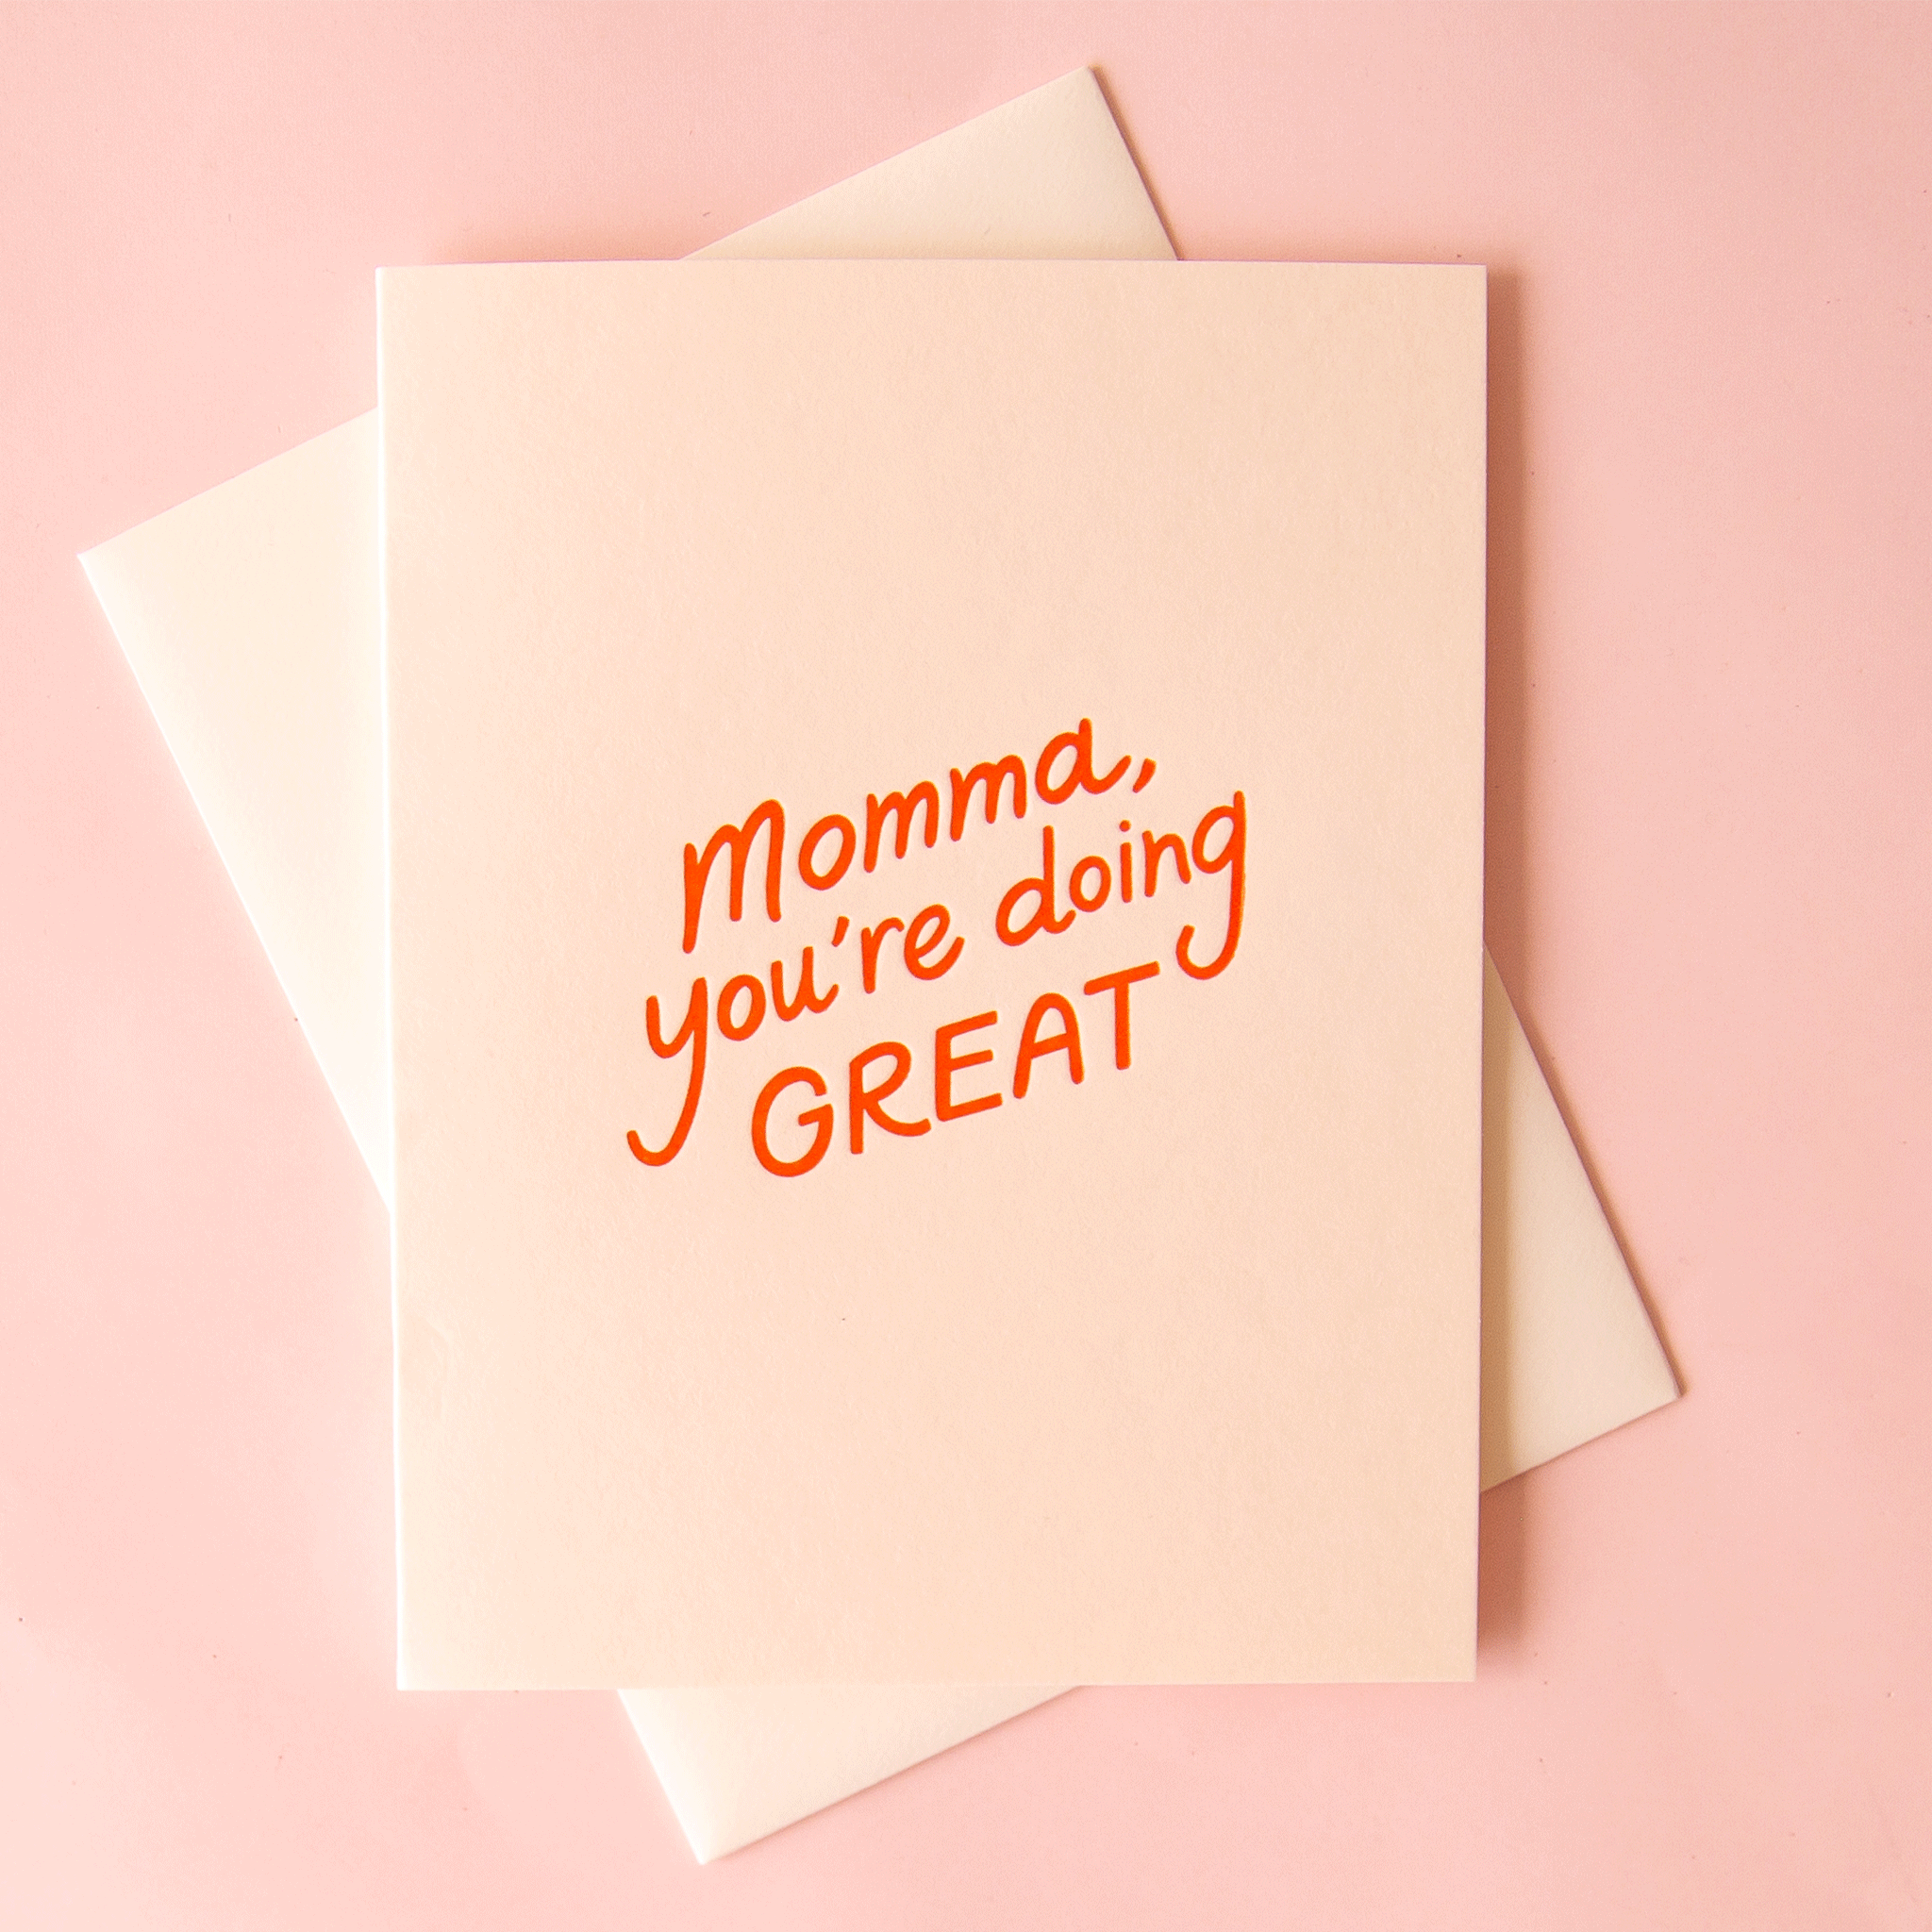 On a pink background is a light ivory card that reads, "Momma, you're doing GREAT" in red letters.